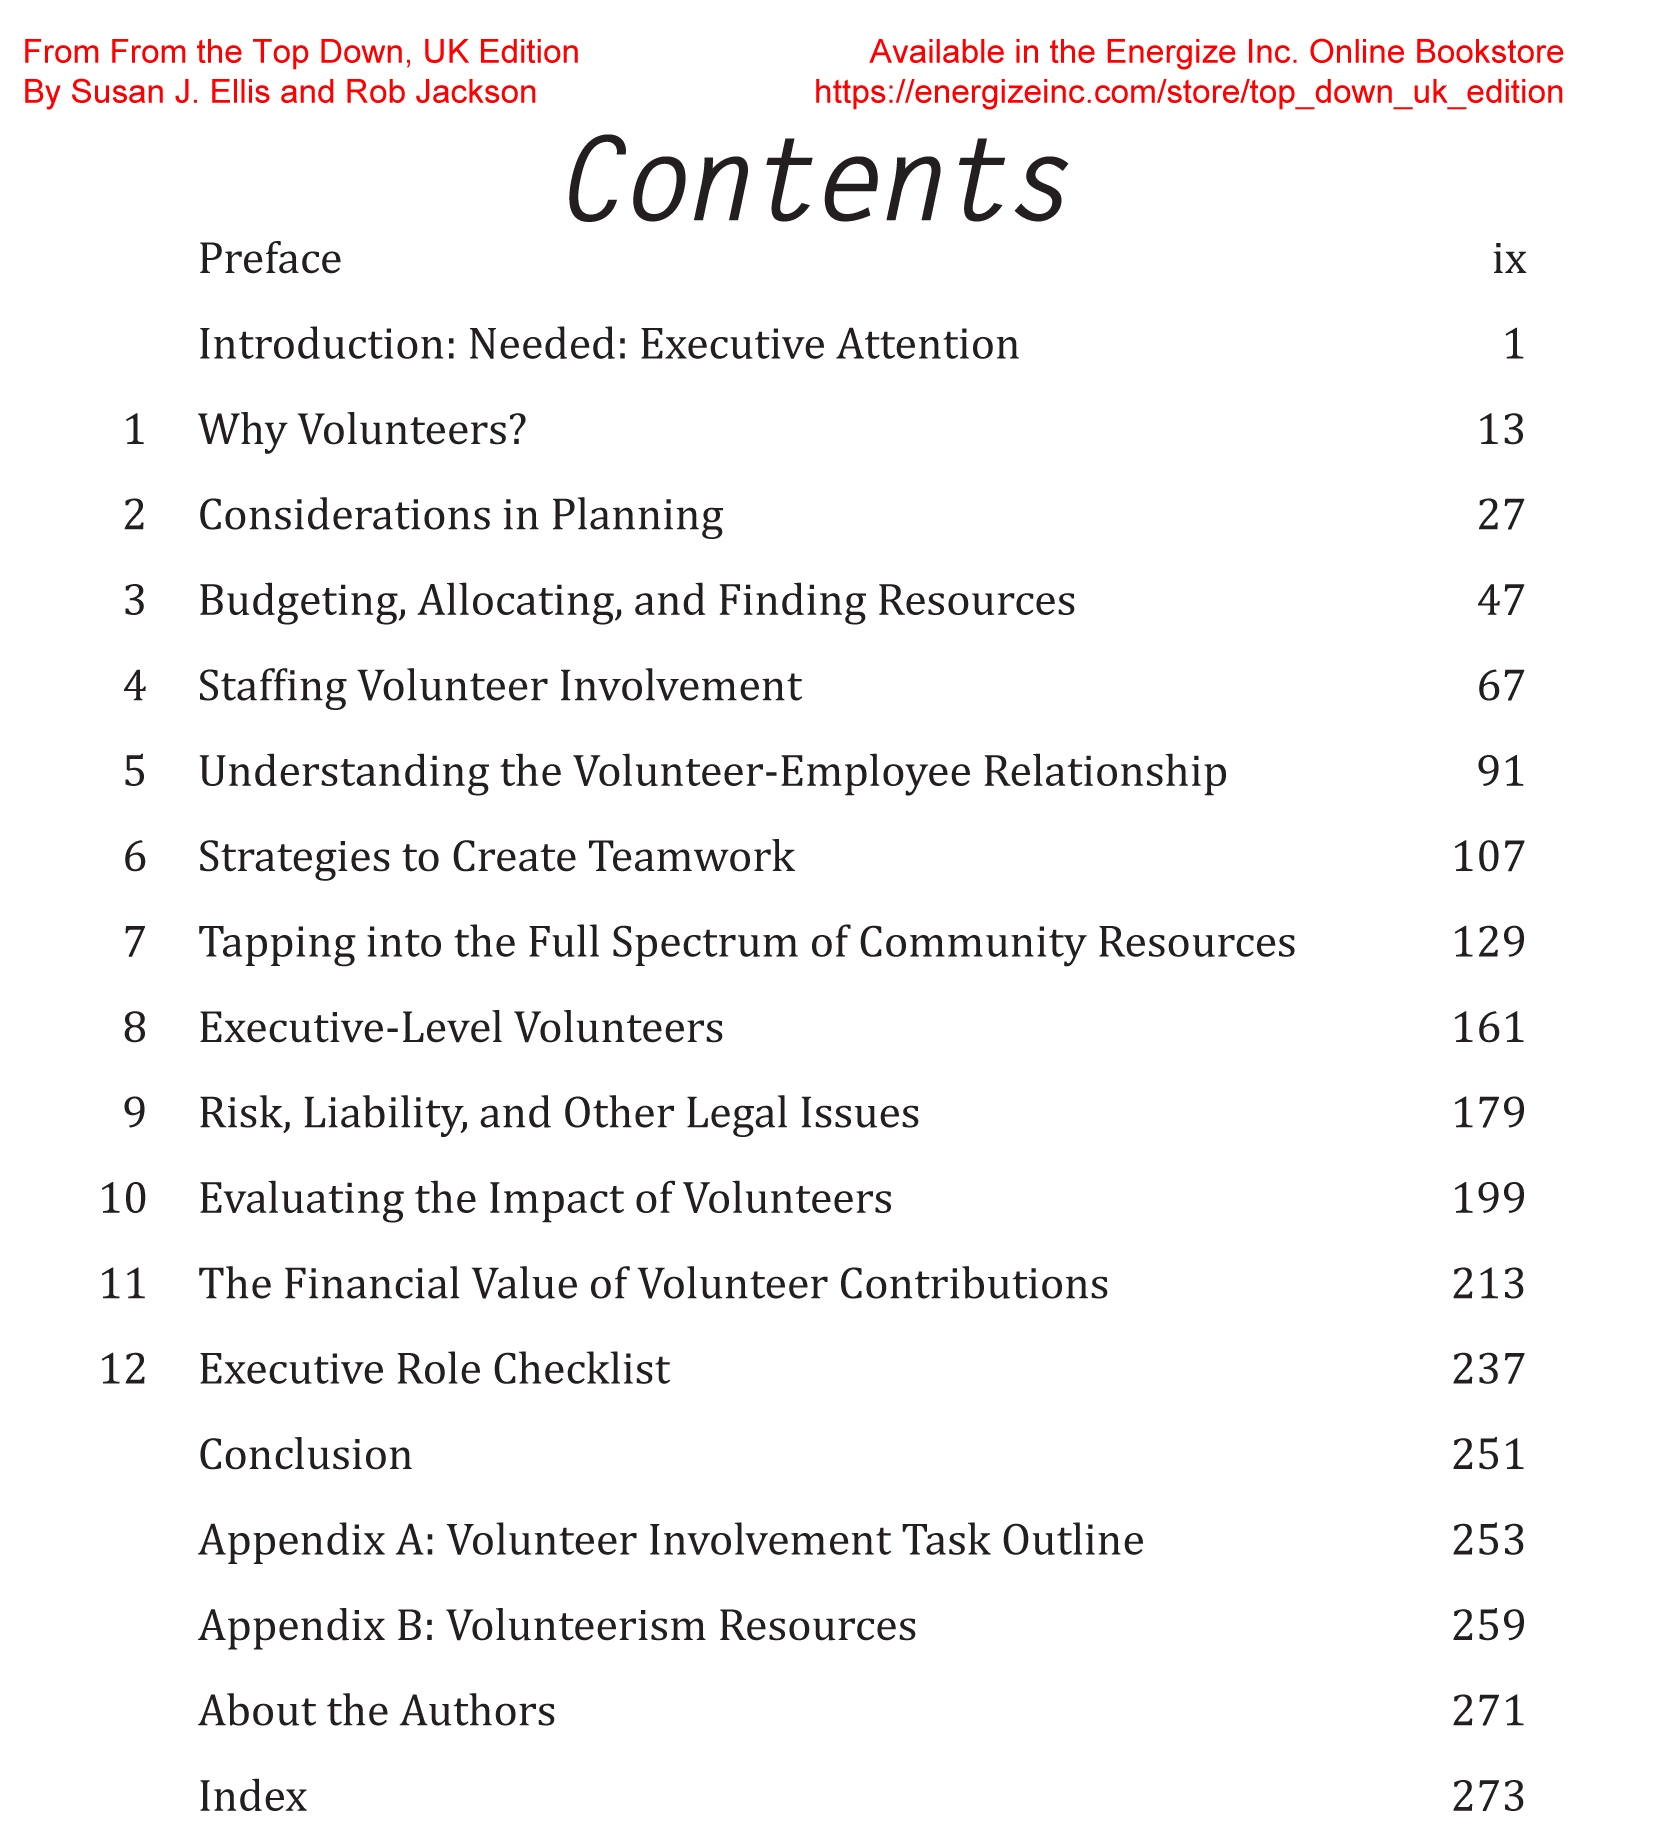 From the Top Down UK Edition toc